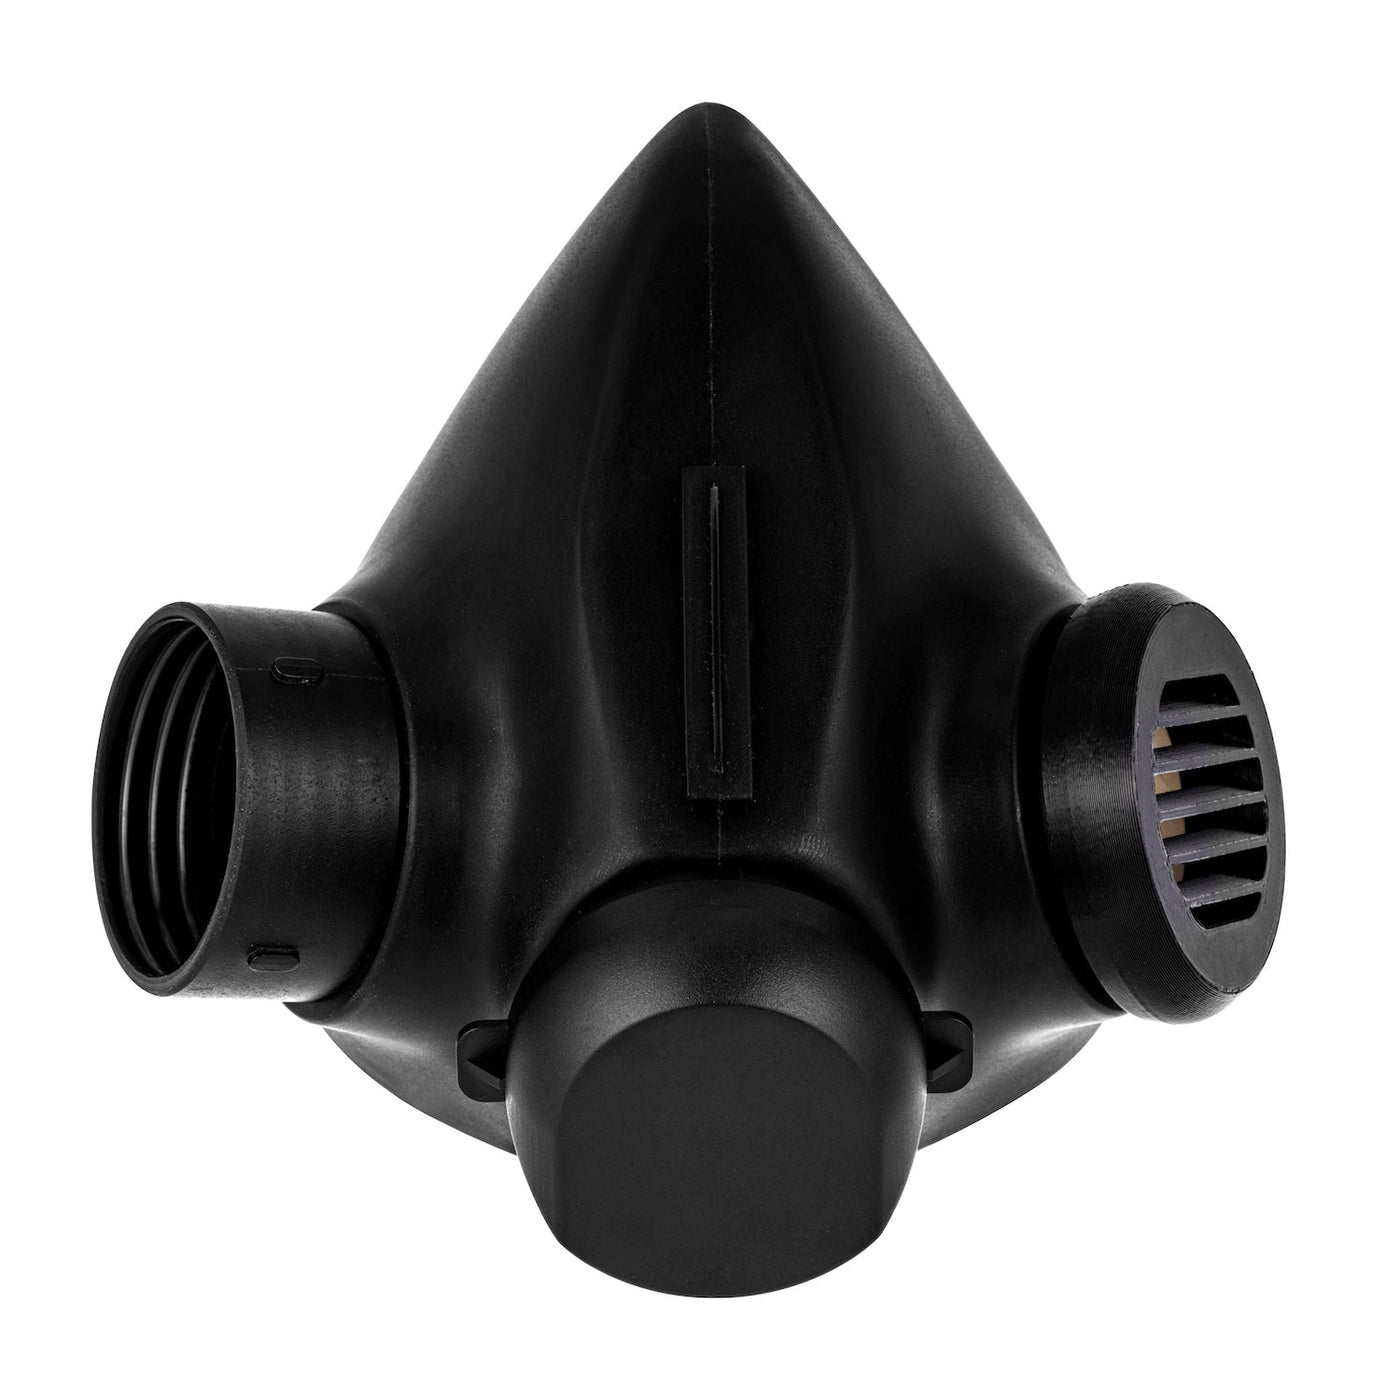 Tactical Air-Purifying Respirator mask (TAPR) right side filter body